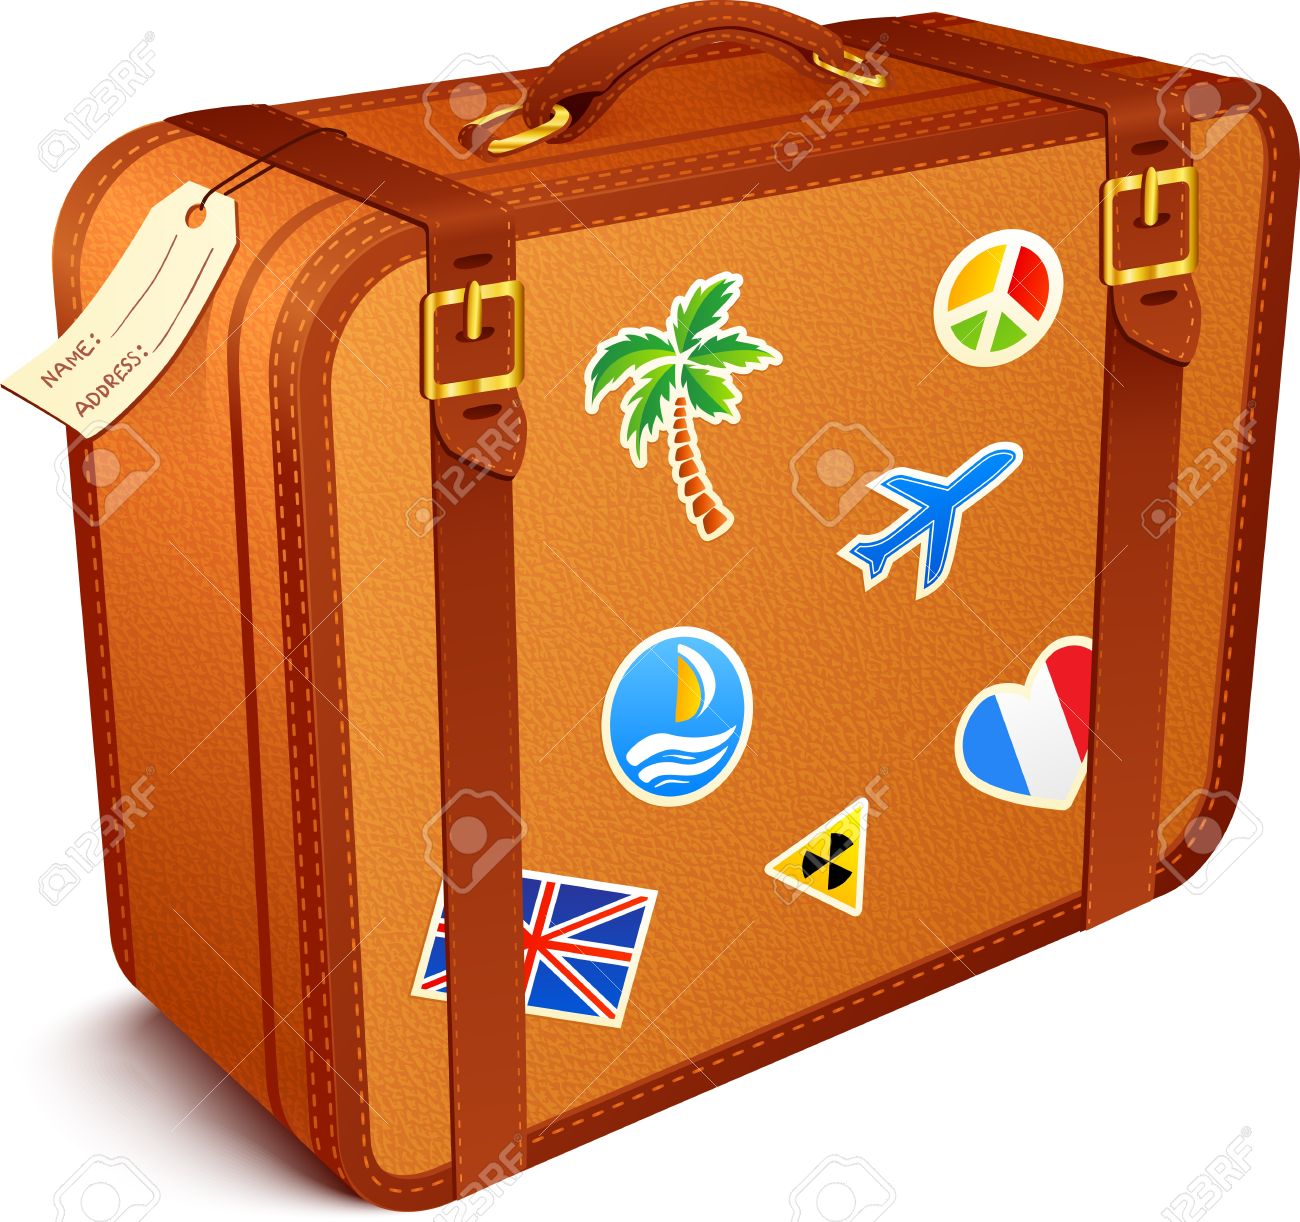 Suitcases clipart - Clipground